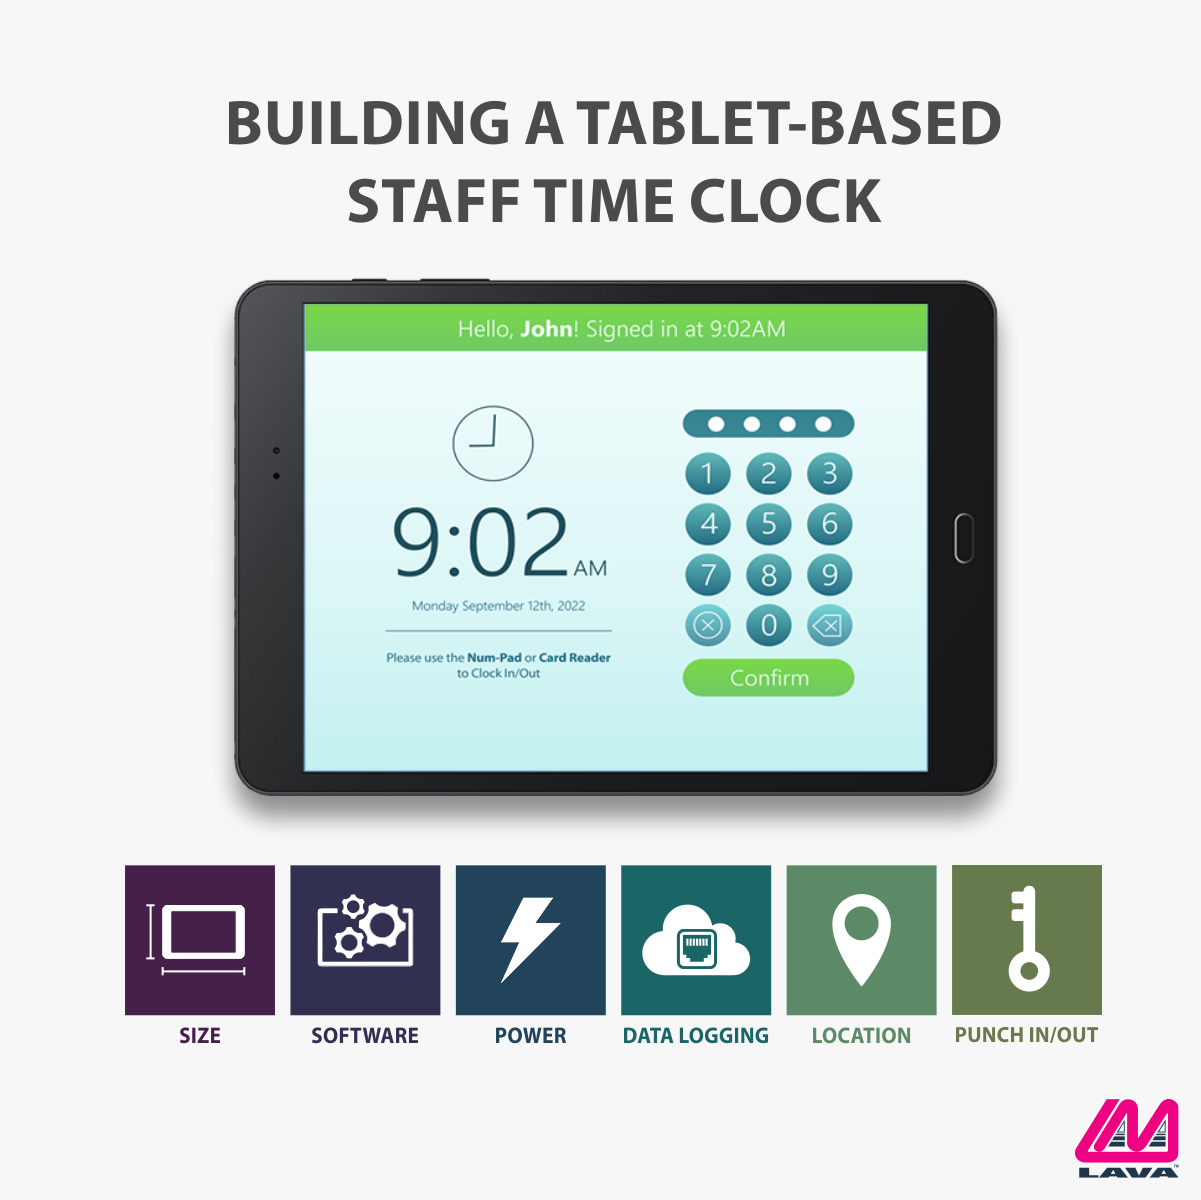 LAVA tablet installation of a tablet-based staff time clock